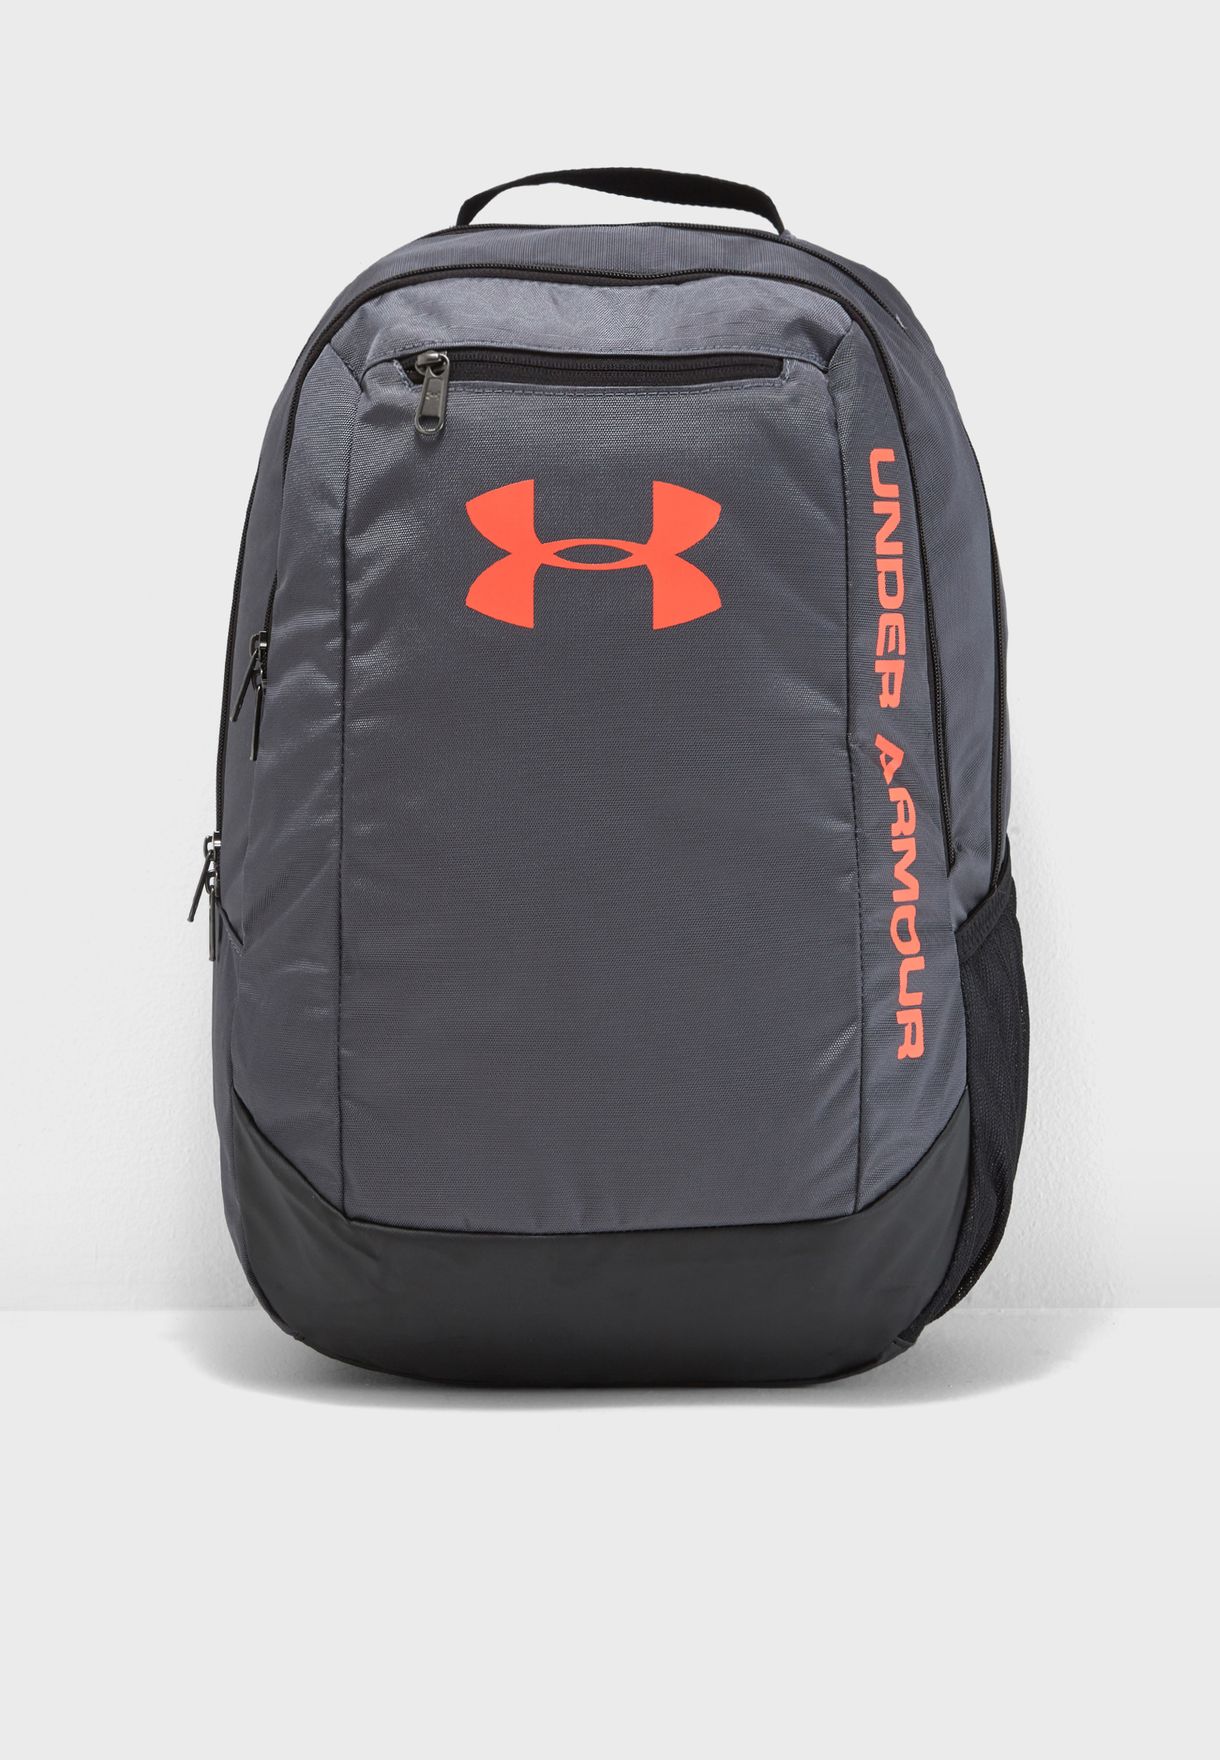 orange and grey under armour backpack